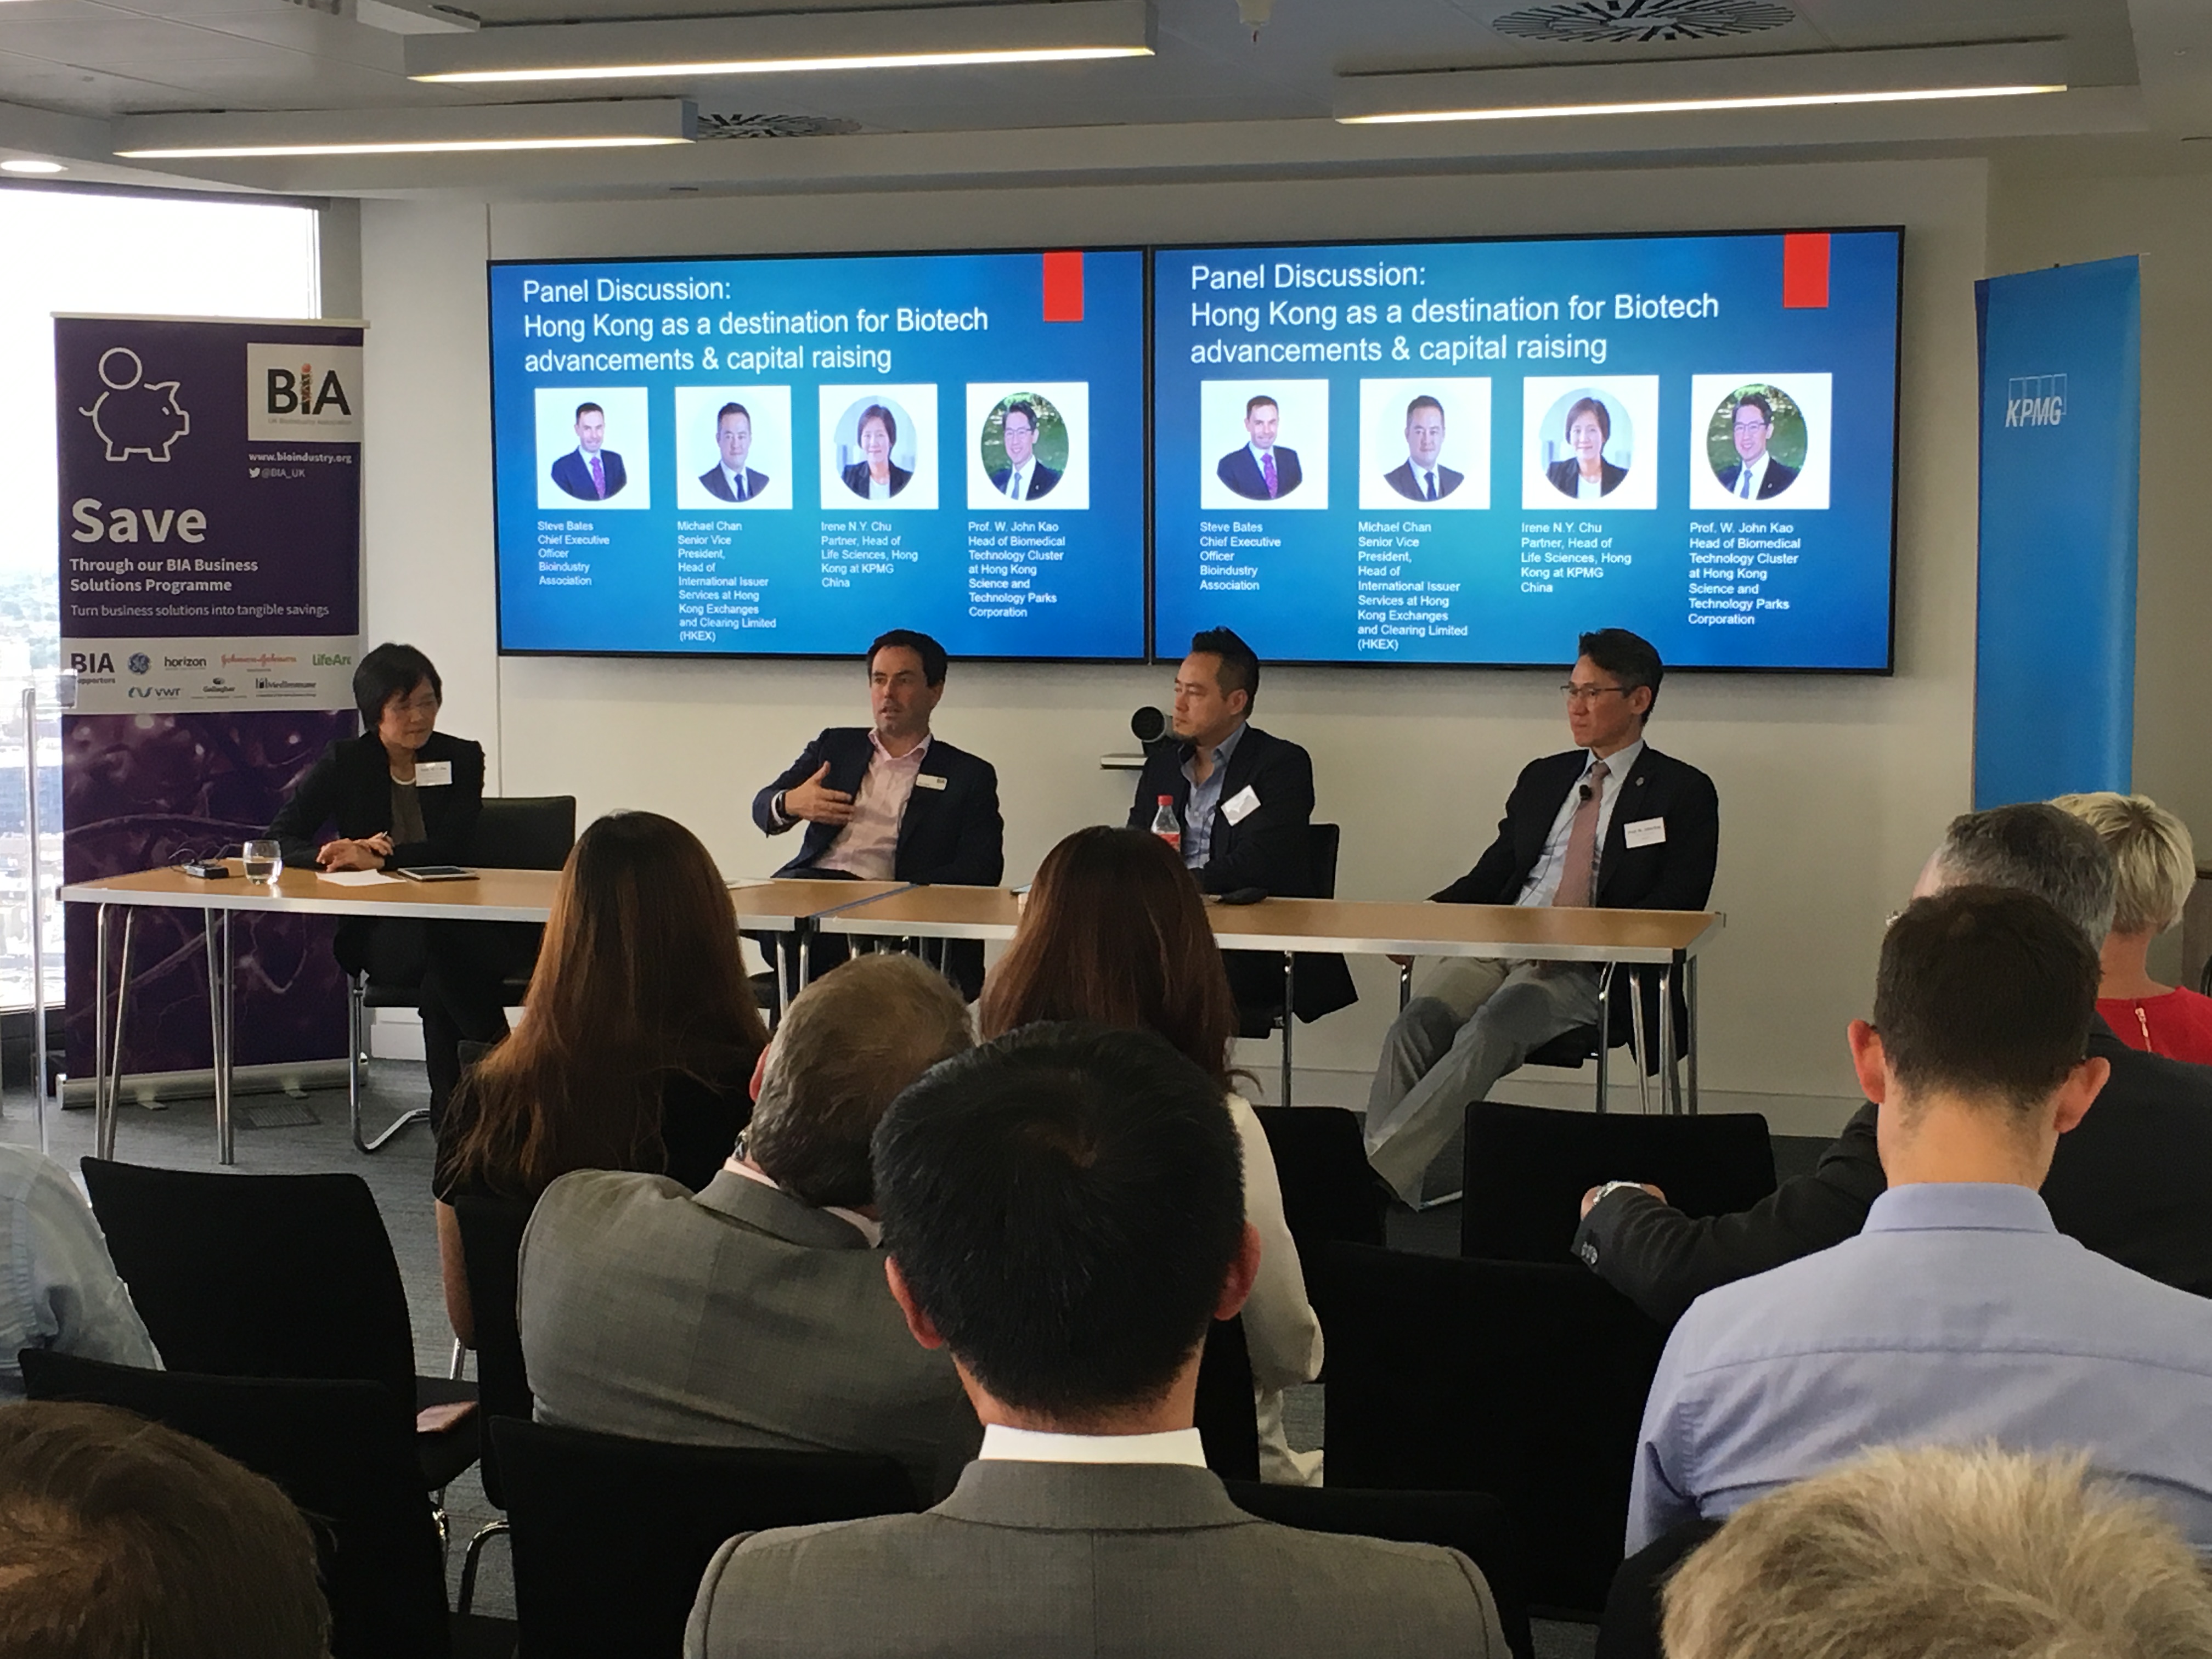 BIA panel discussion: Hong Kong as a destination for Biotech advancements & capital raising July 2019